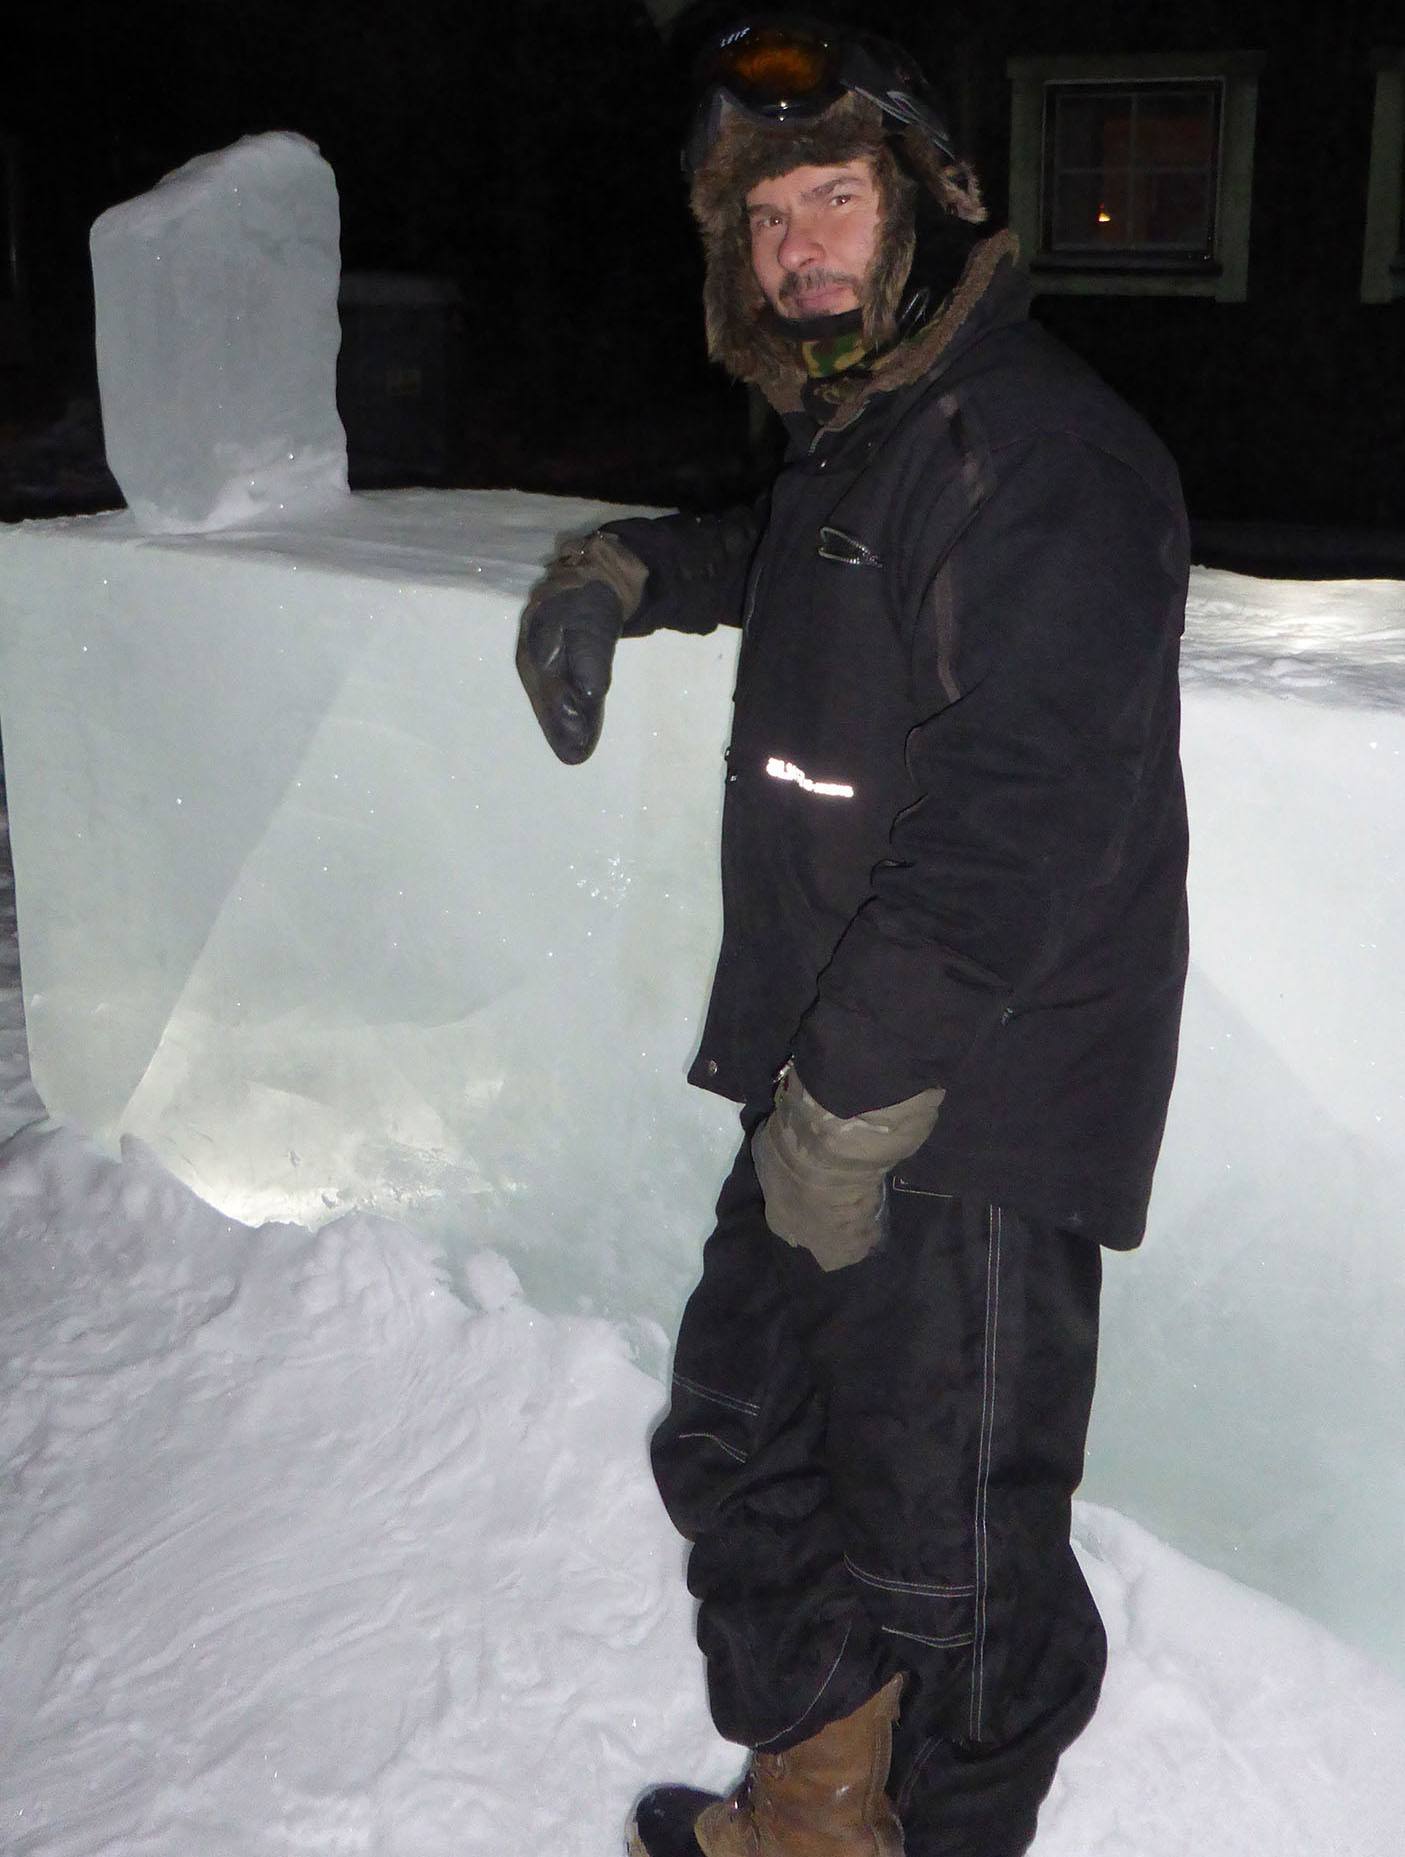 Host of Camp Alta outside Ice Hotel in Sweden